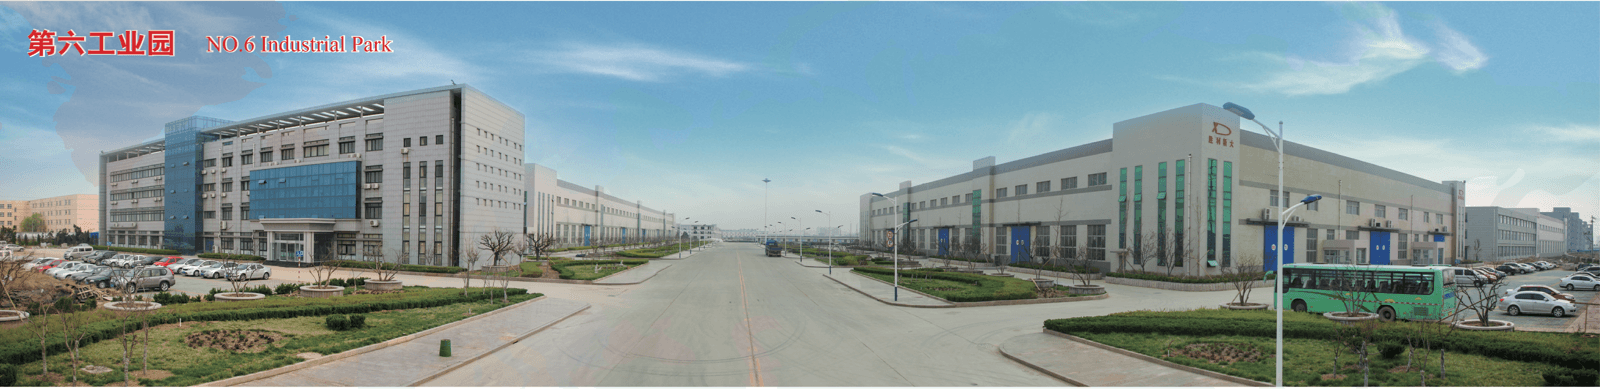 The Sixth Industrial Park